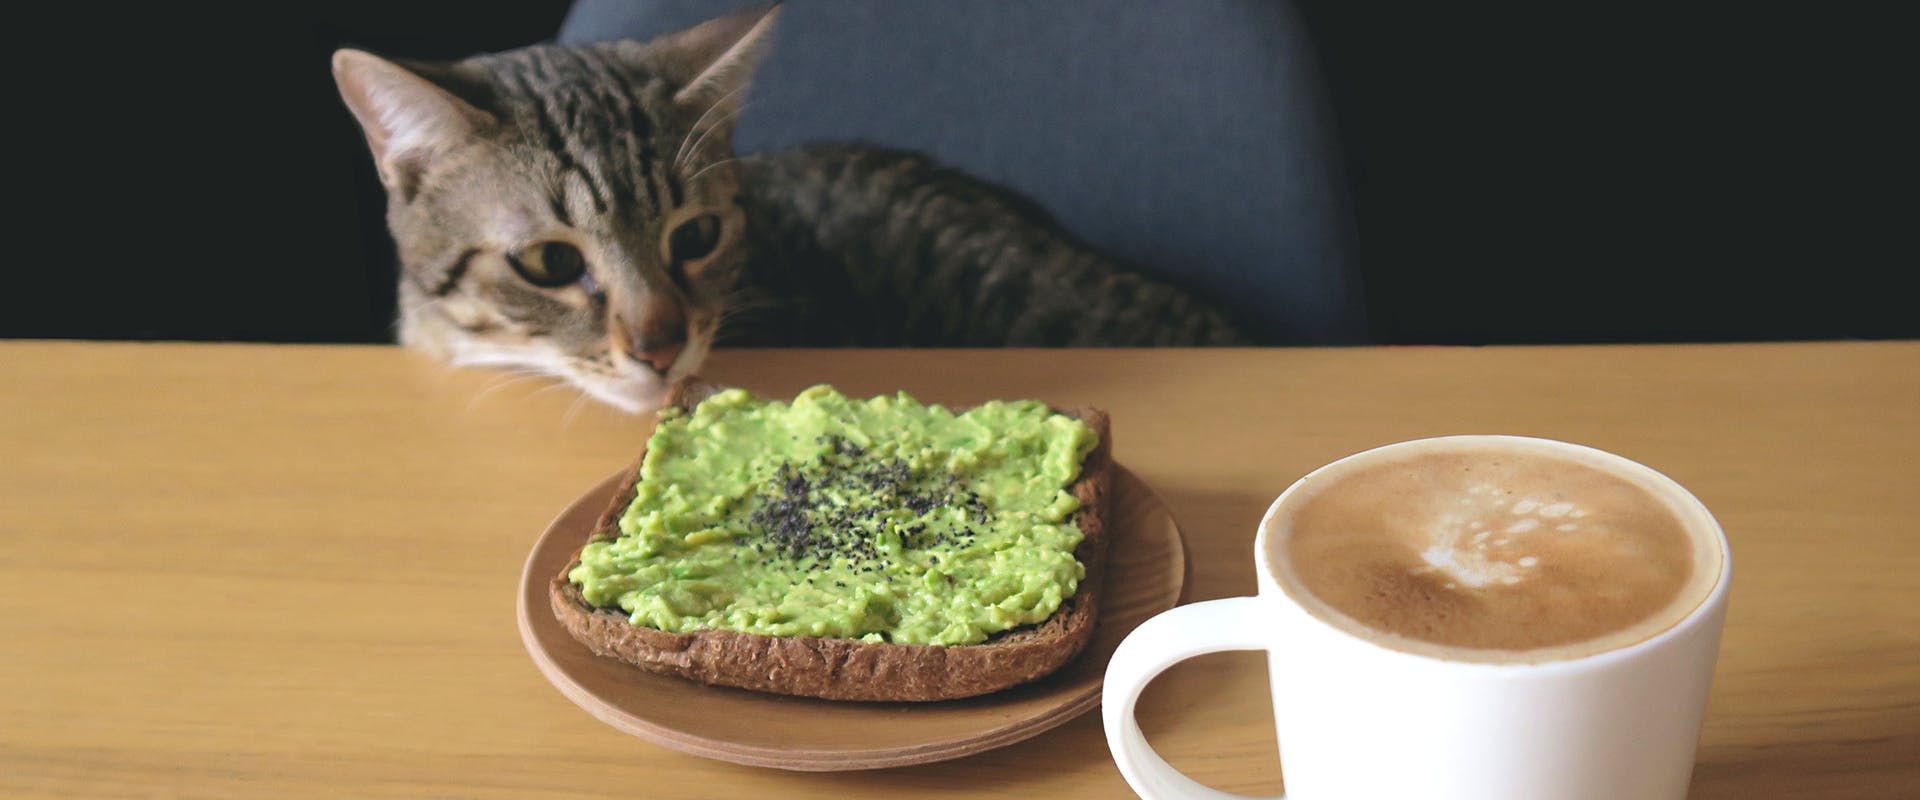 A cat sitting at a breakfast table, sniffing at a plate of avocado toast